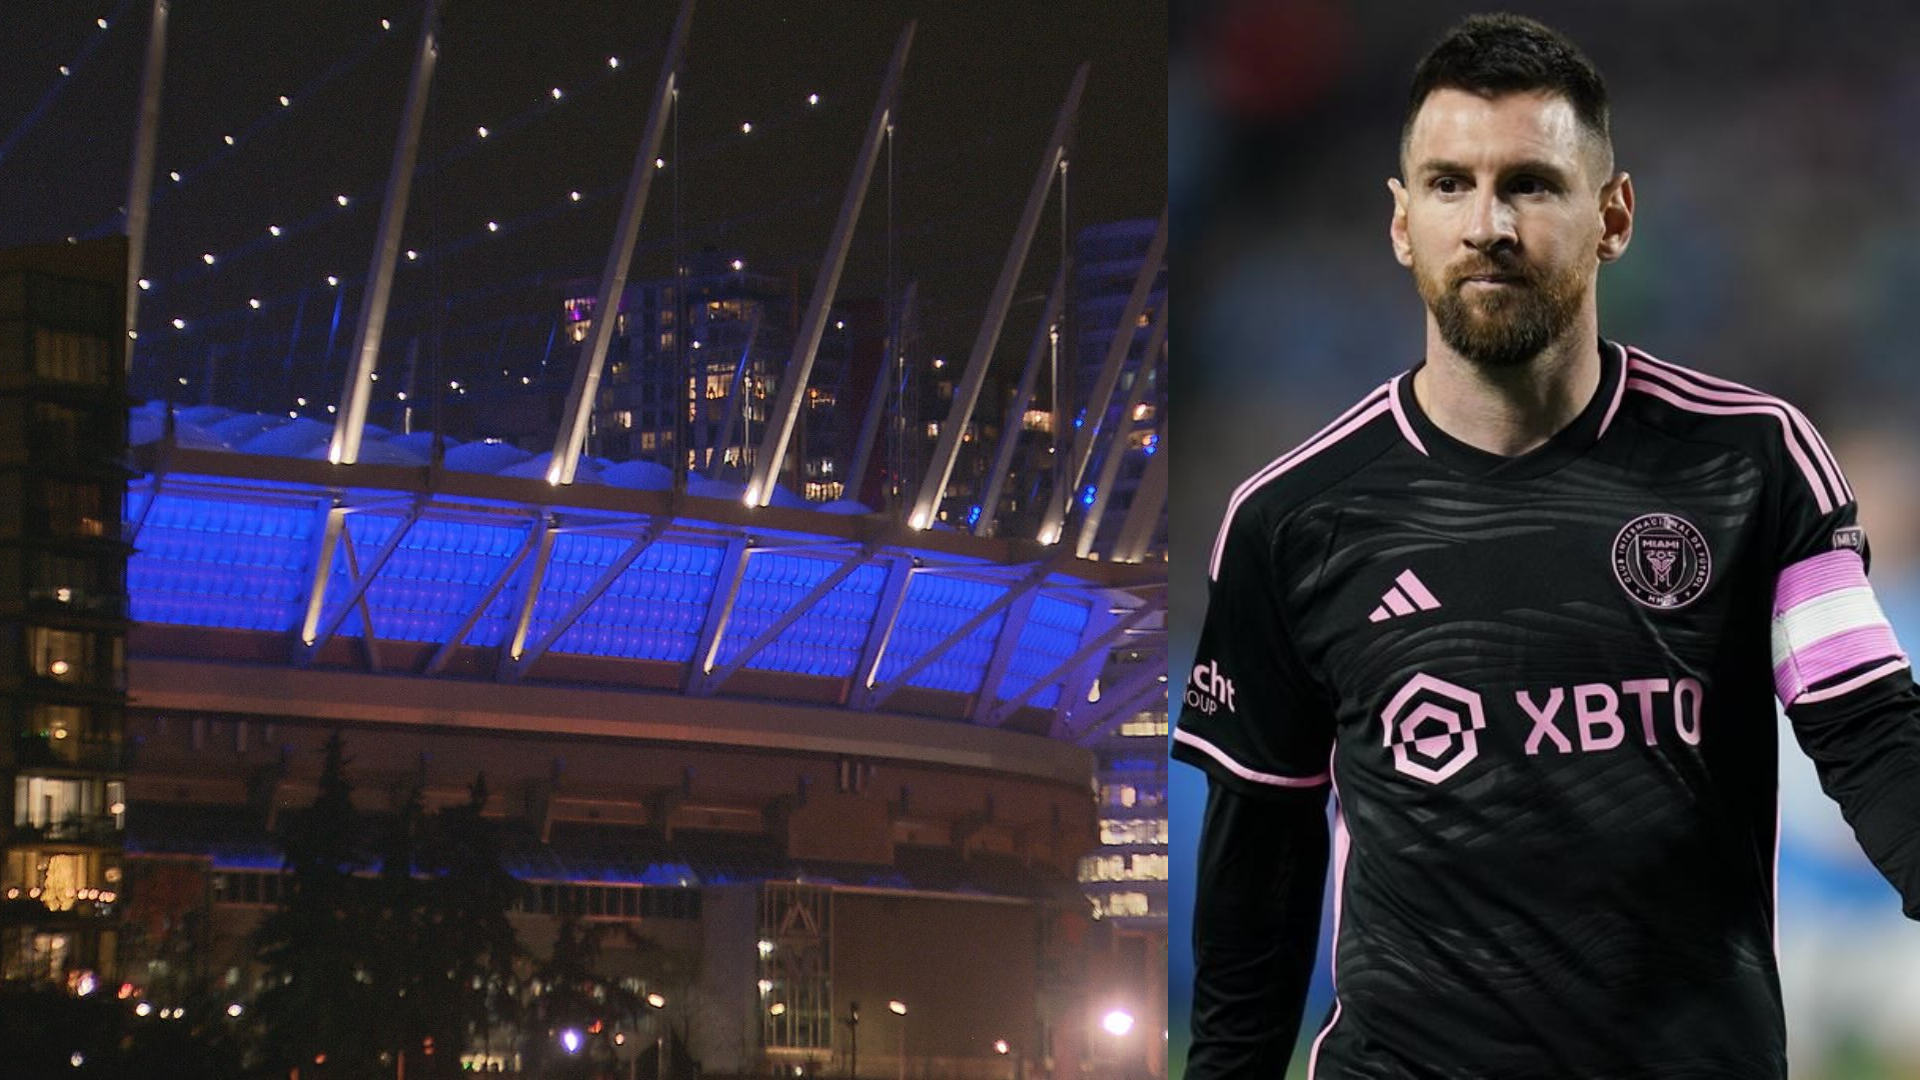 Soccer fans gutted after Messi set to miss Vancouver game